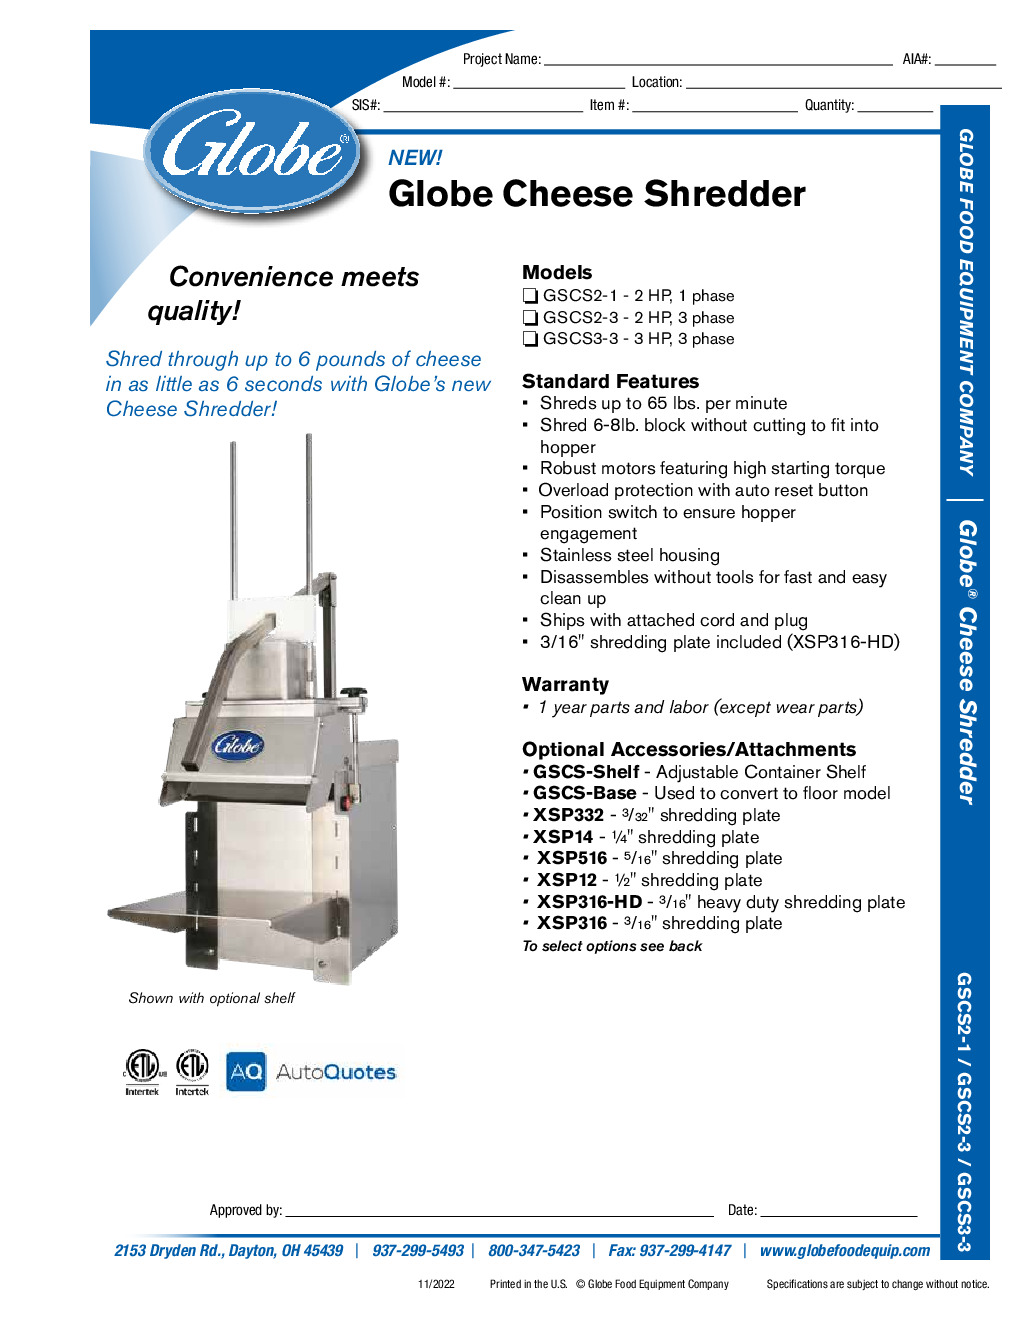 Globe Releases New Cheese Shredder - Pizza Today